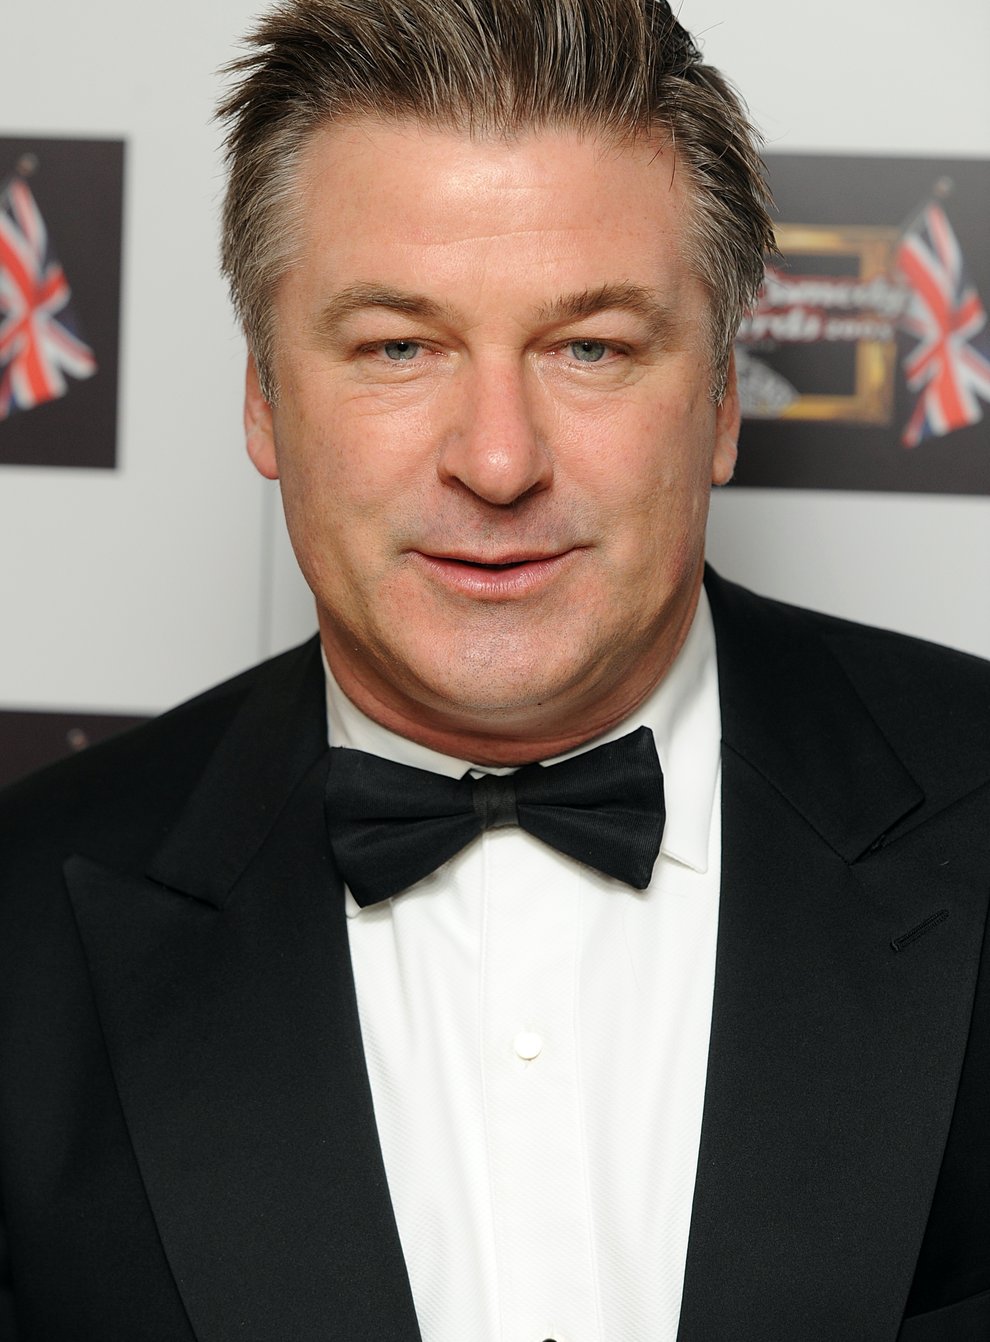 The film is produced by Alec Baldwin (Ian West/PA)